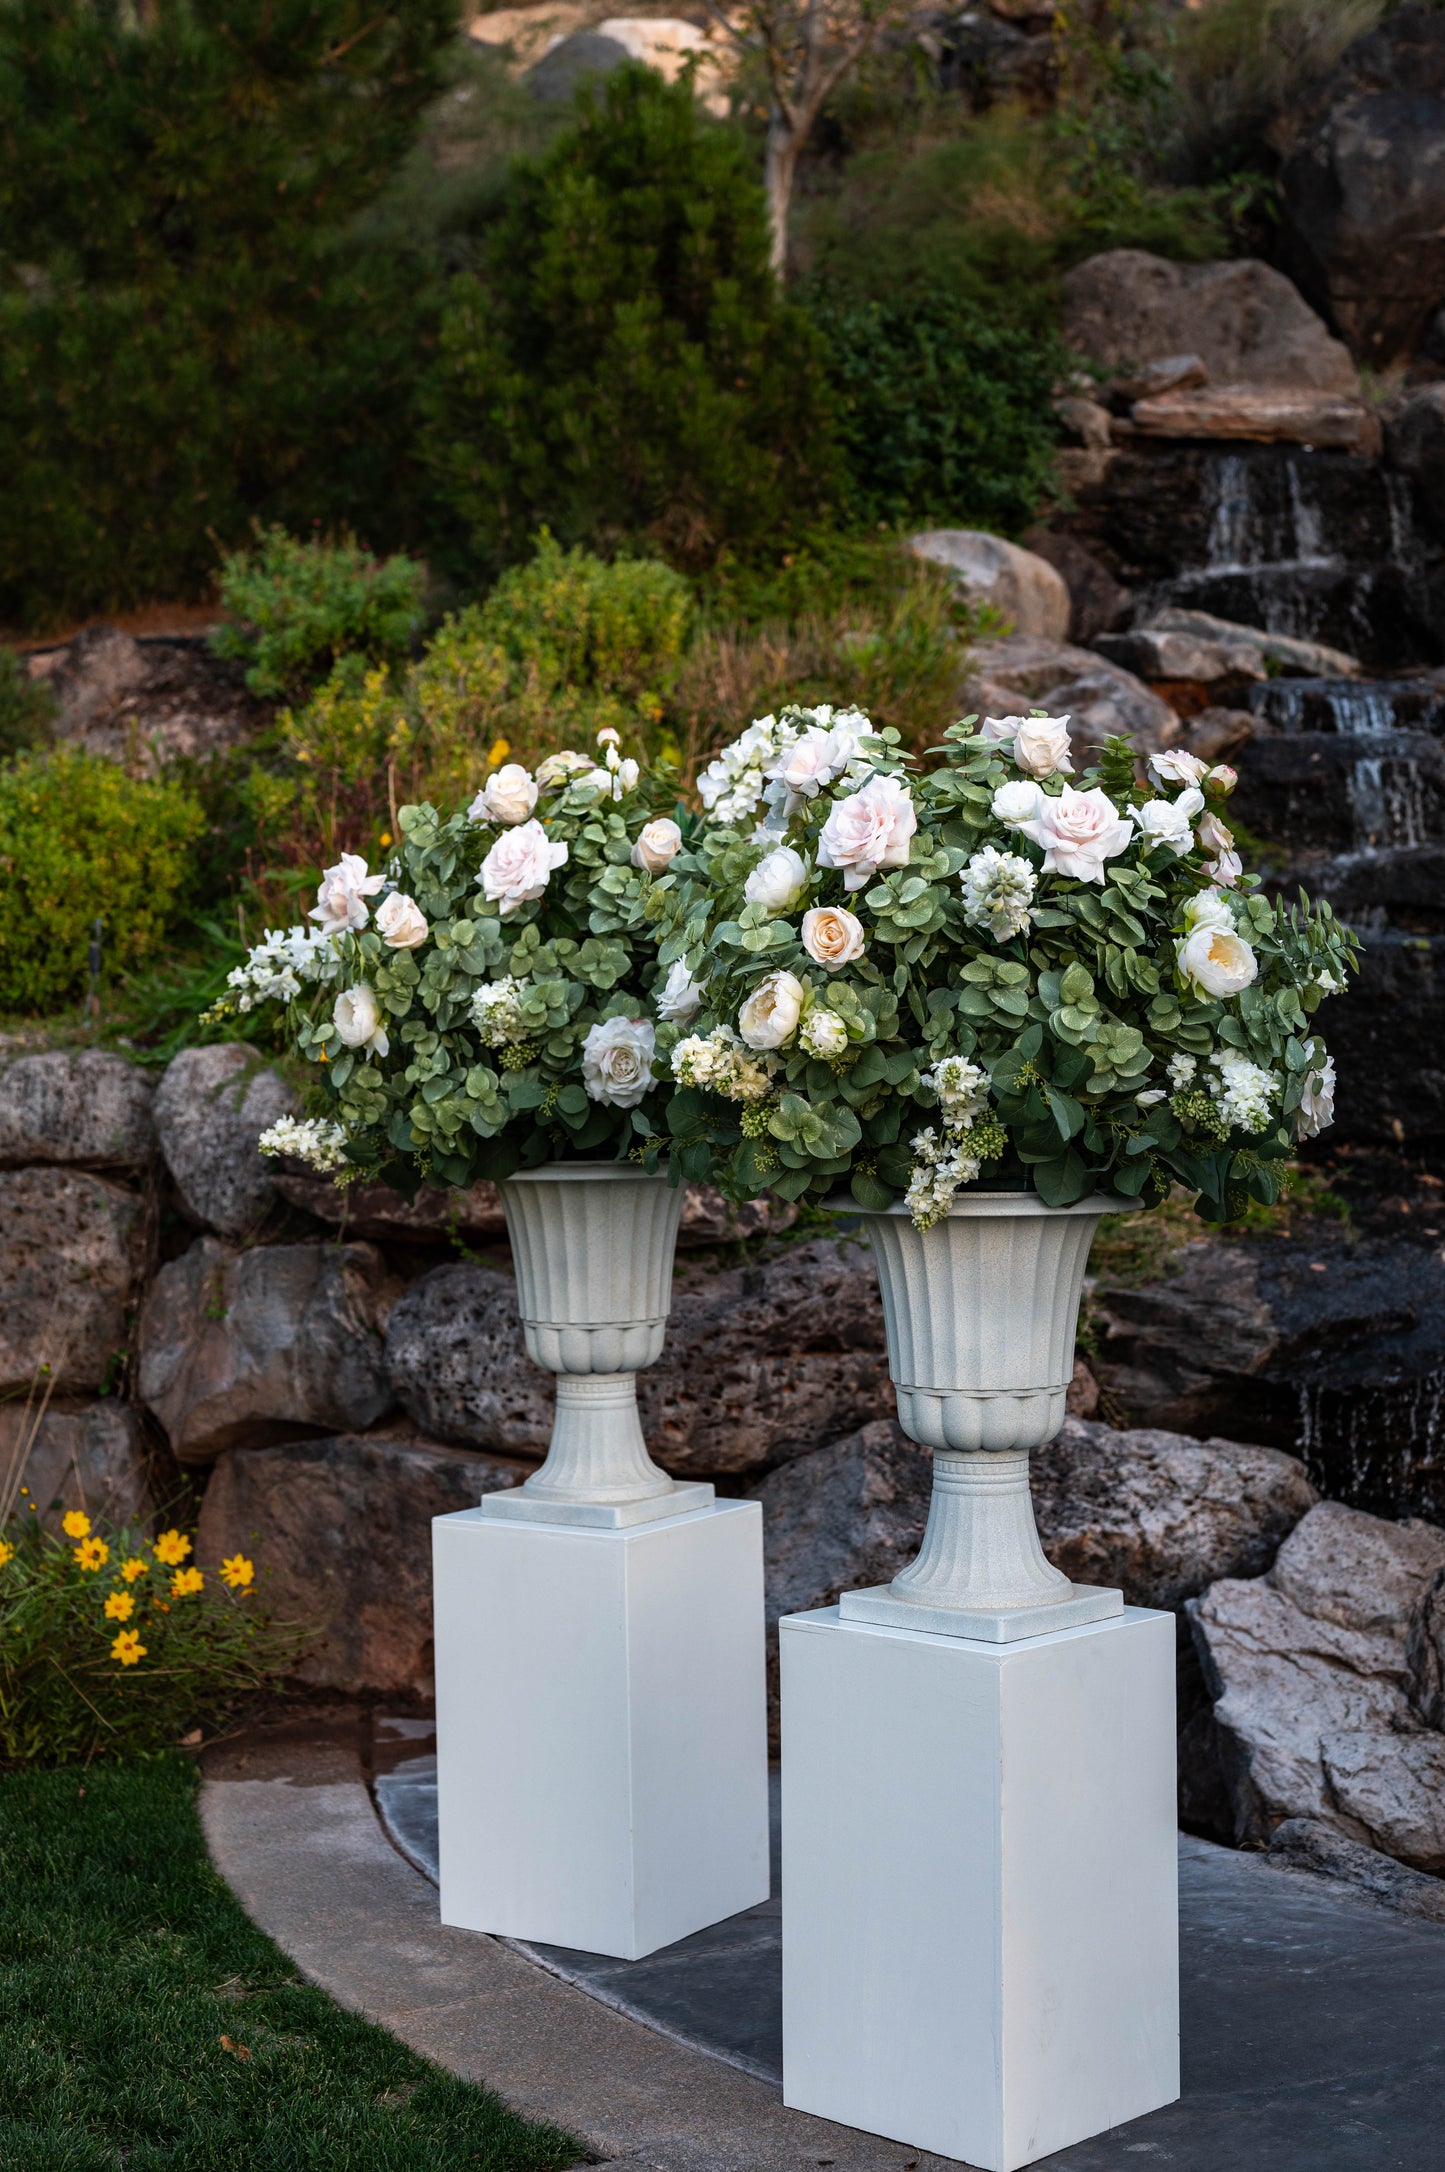 Two wedding urns filled with flowers placed on pedestals for wedding rentals